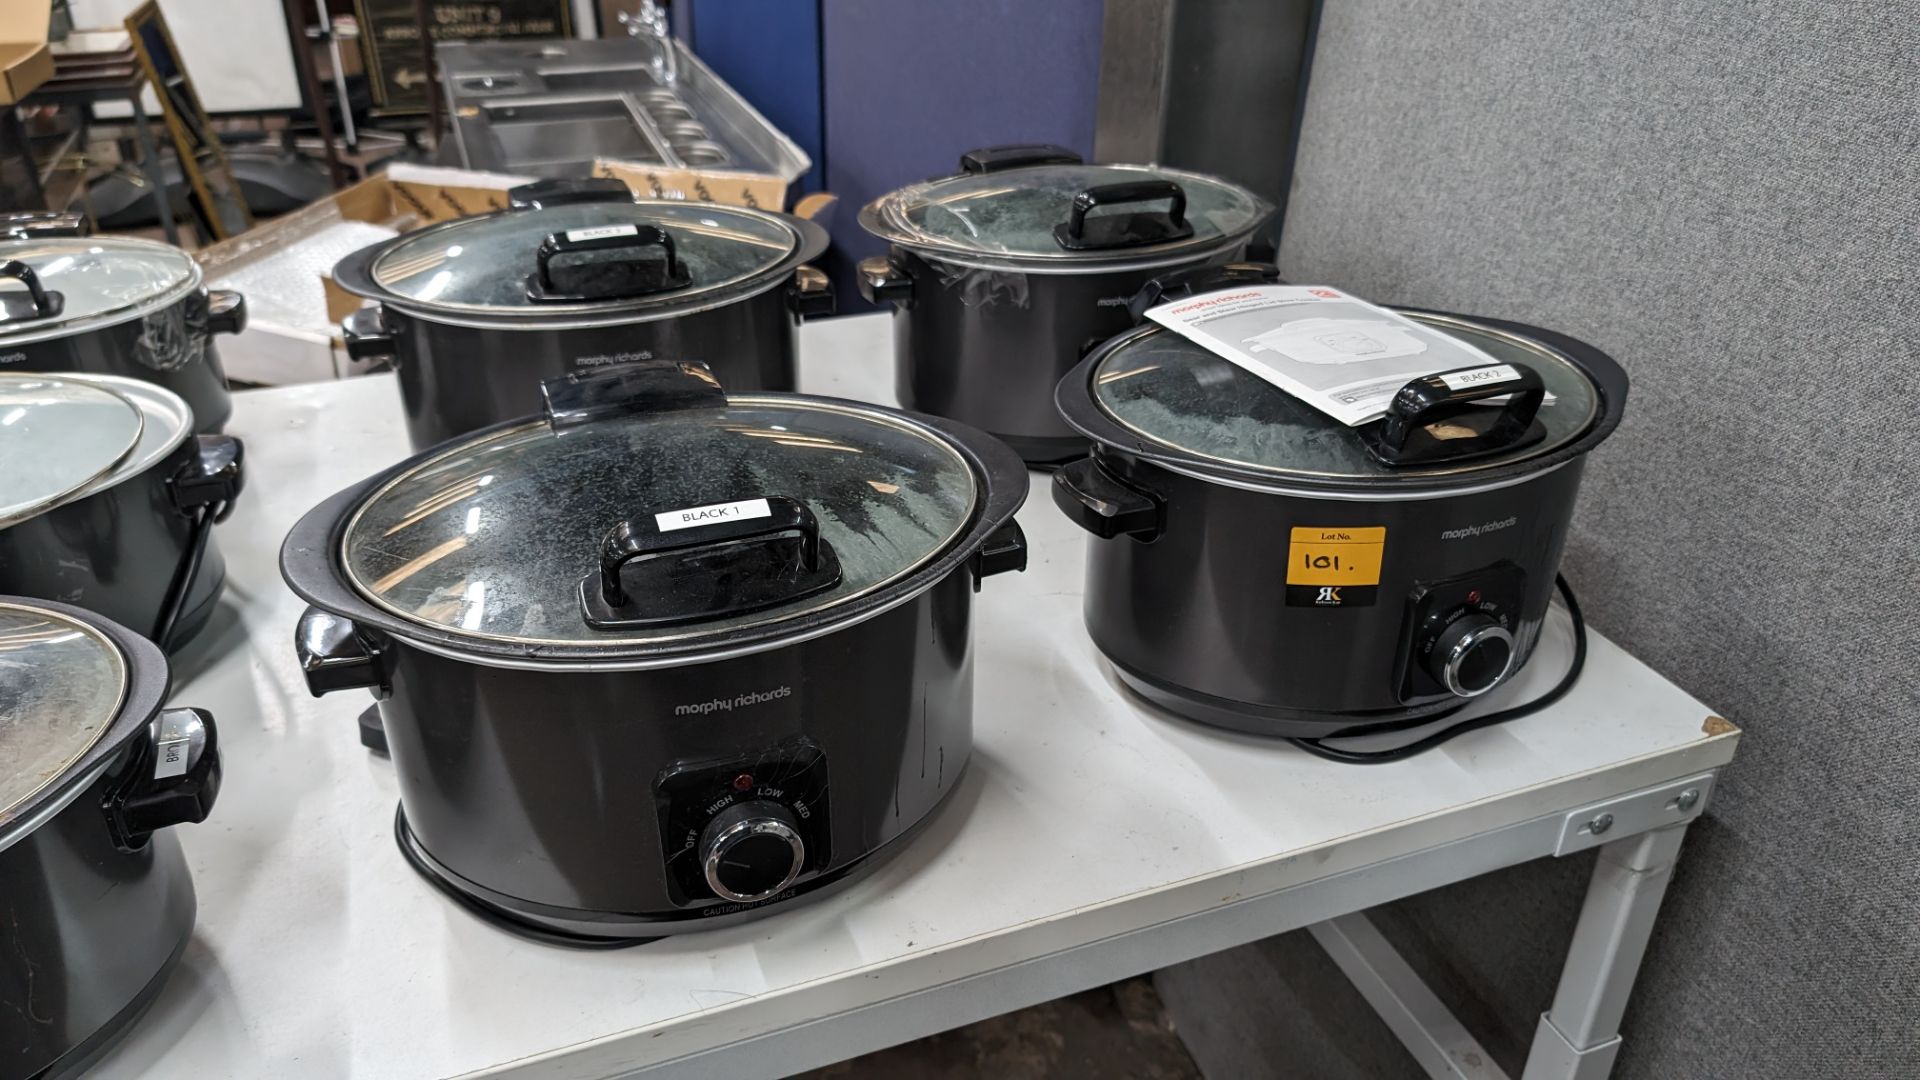 4 off Morphy Richards hinged lid slow cookers, model 461020. NB: At least some of these have been